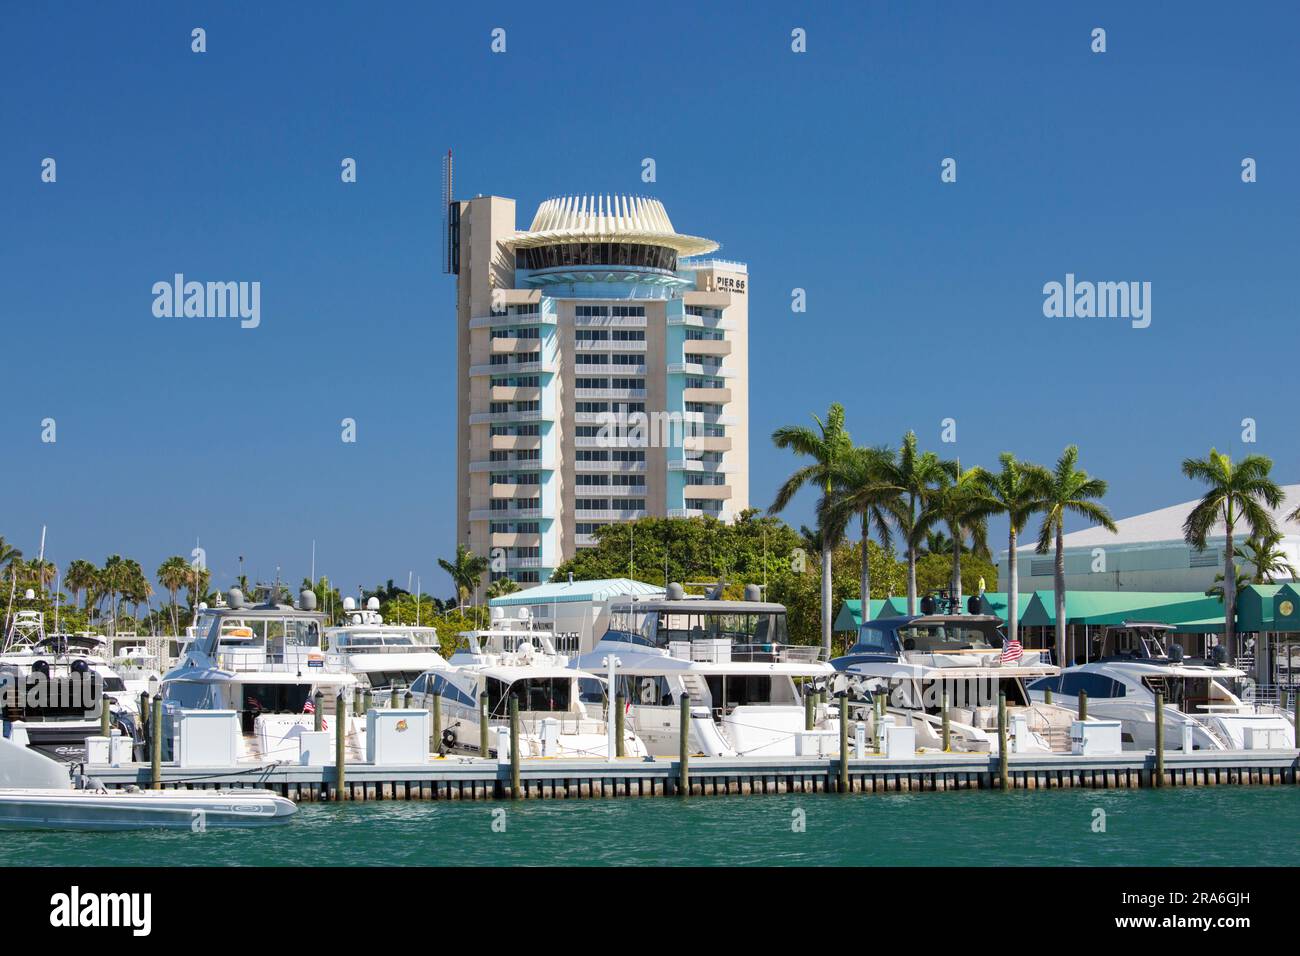 Fort Lauderdale, Florida, USA. View across the Stranahan River to the Pier 66 hotel and marina complex, Harbor Beach district. Stock Photo